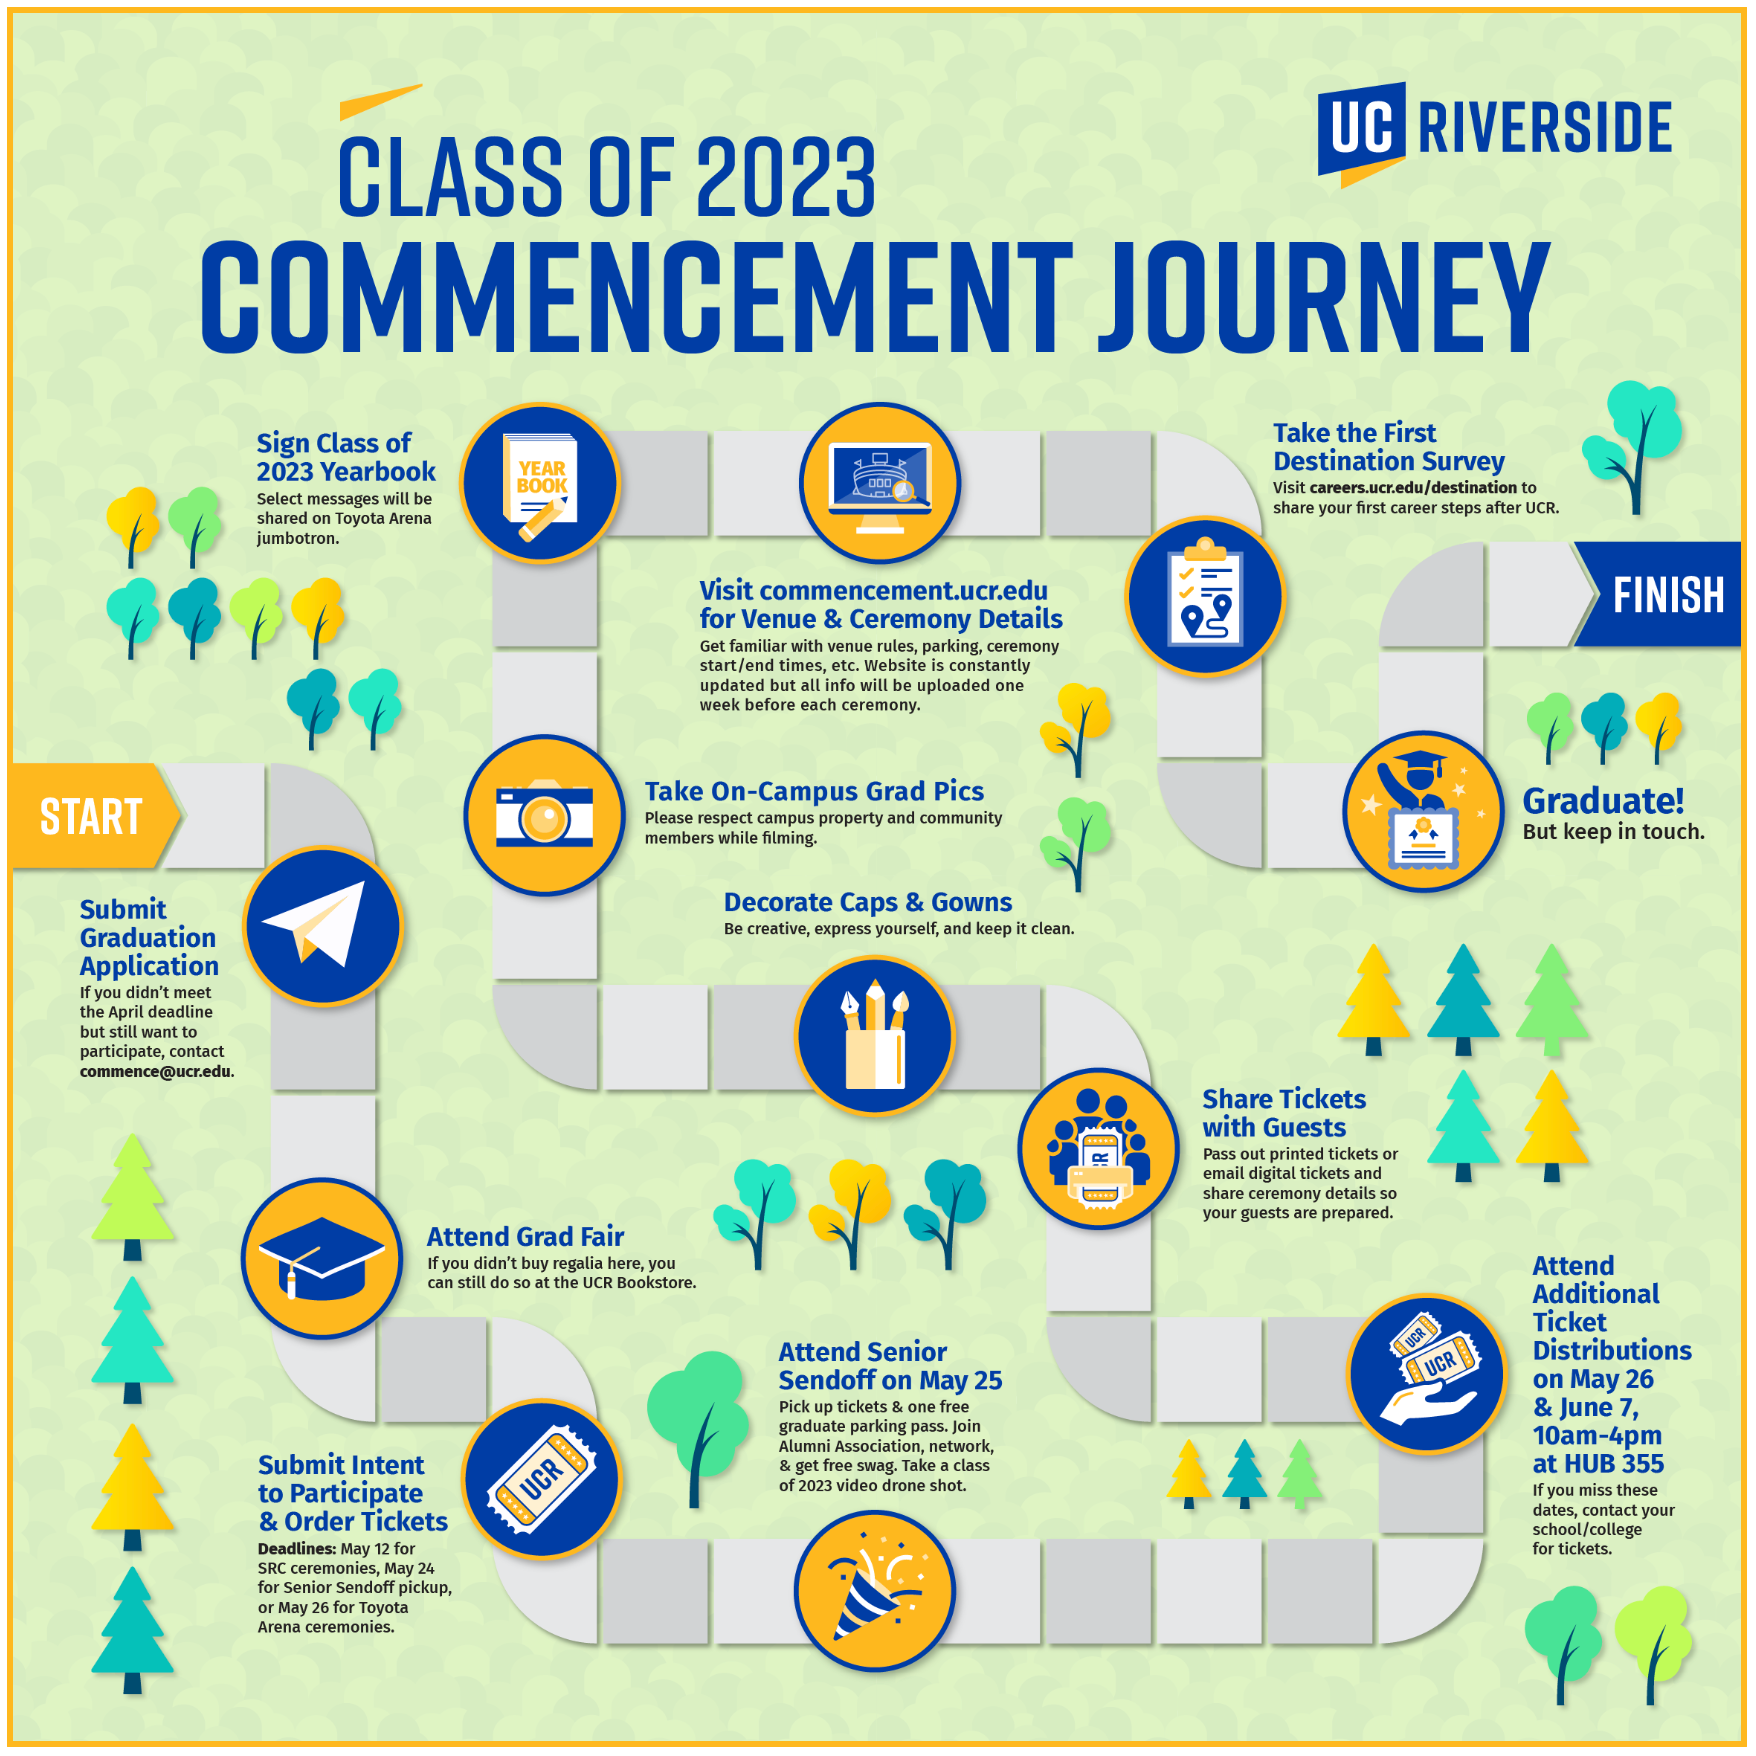 2023 Commencement Journey infographic